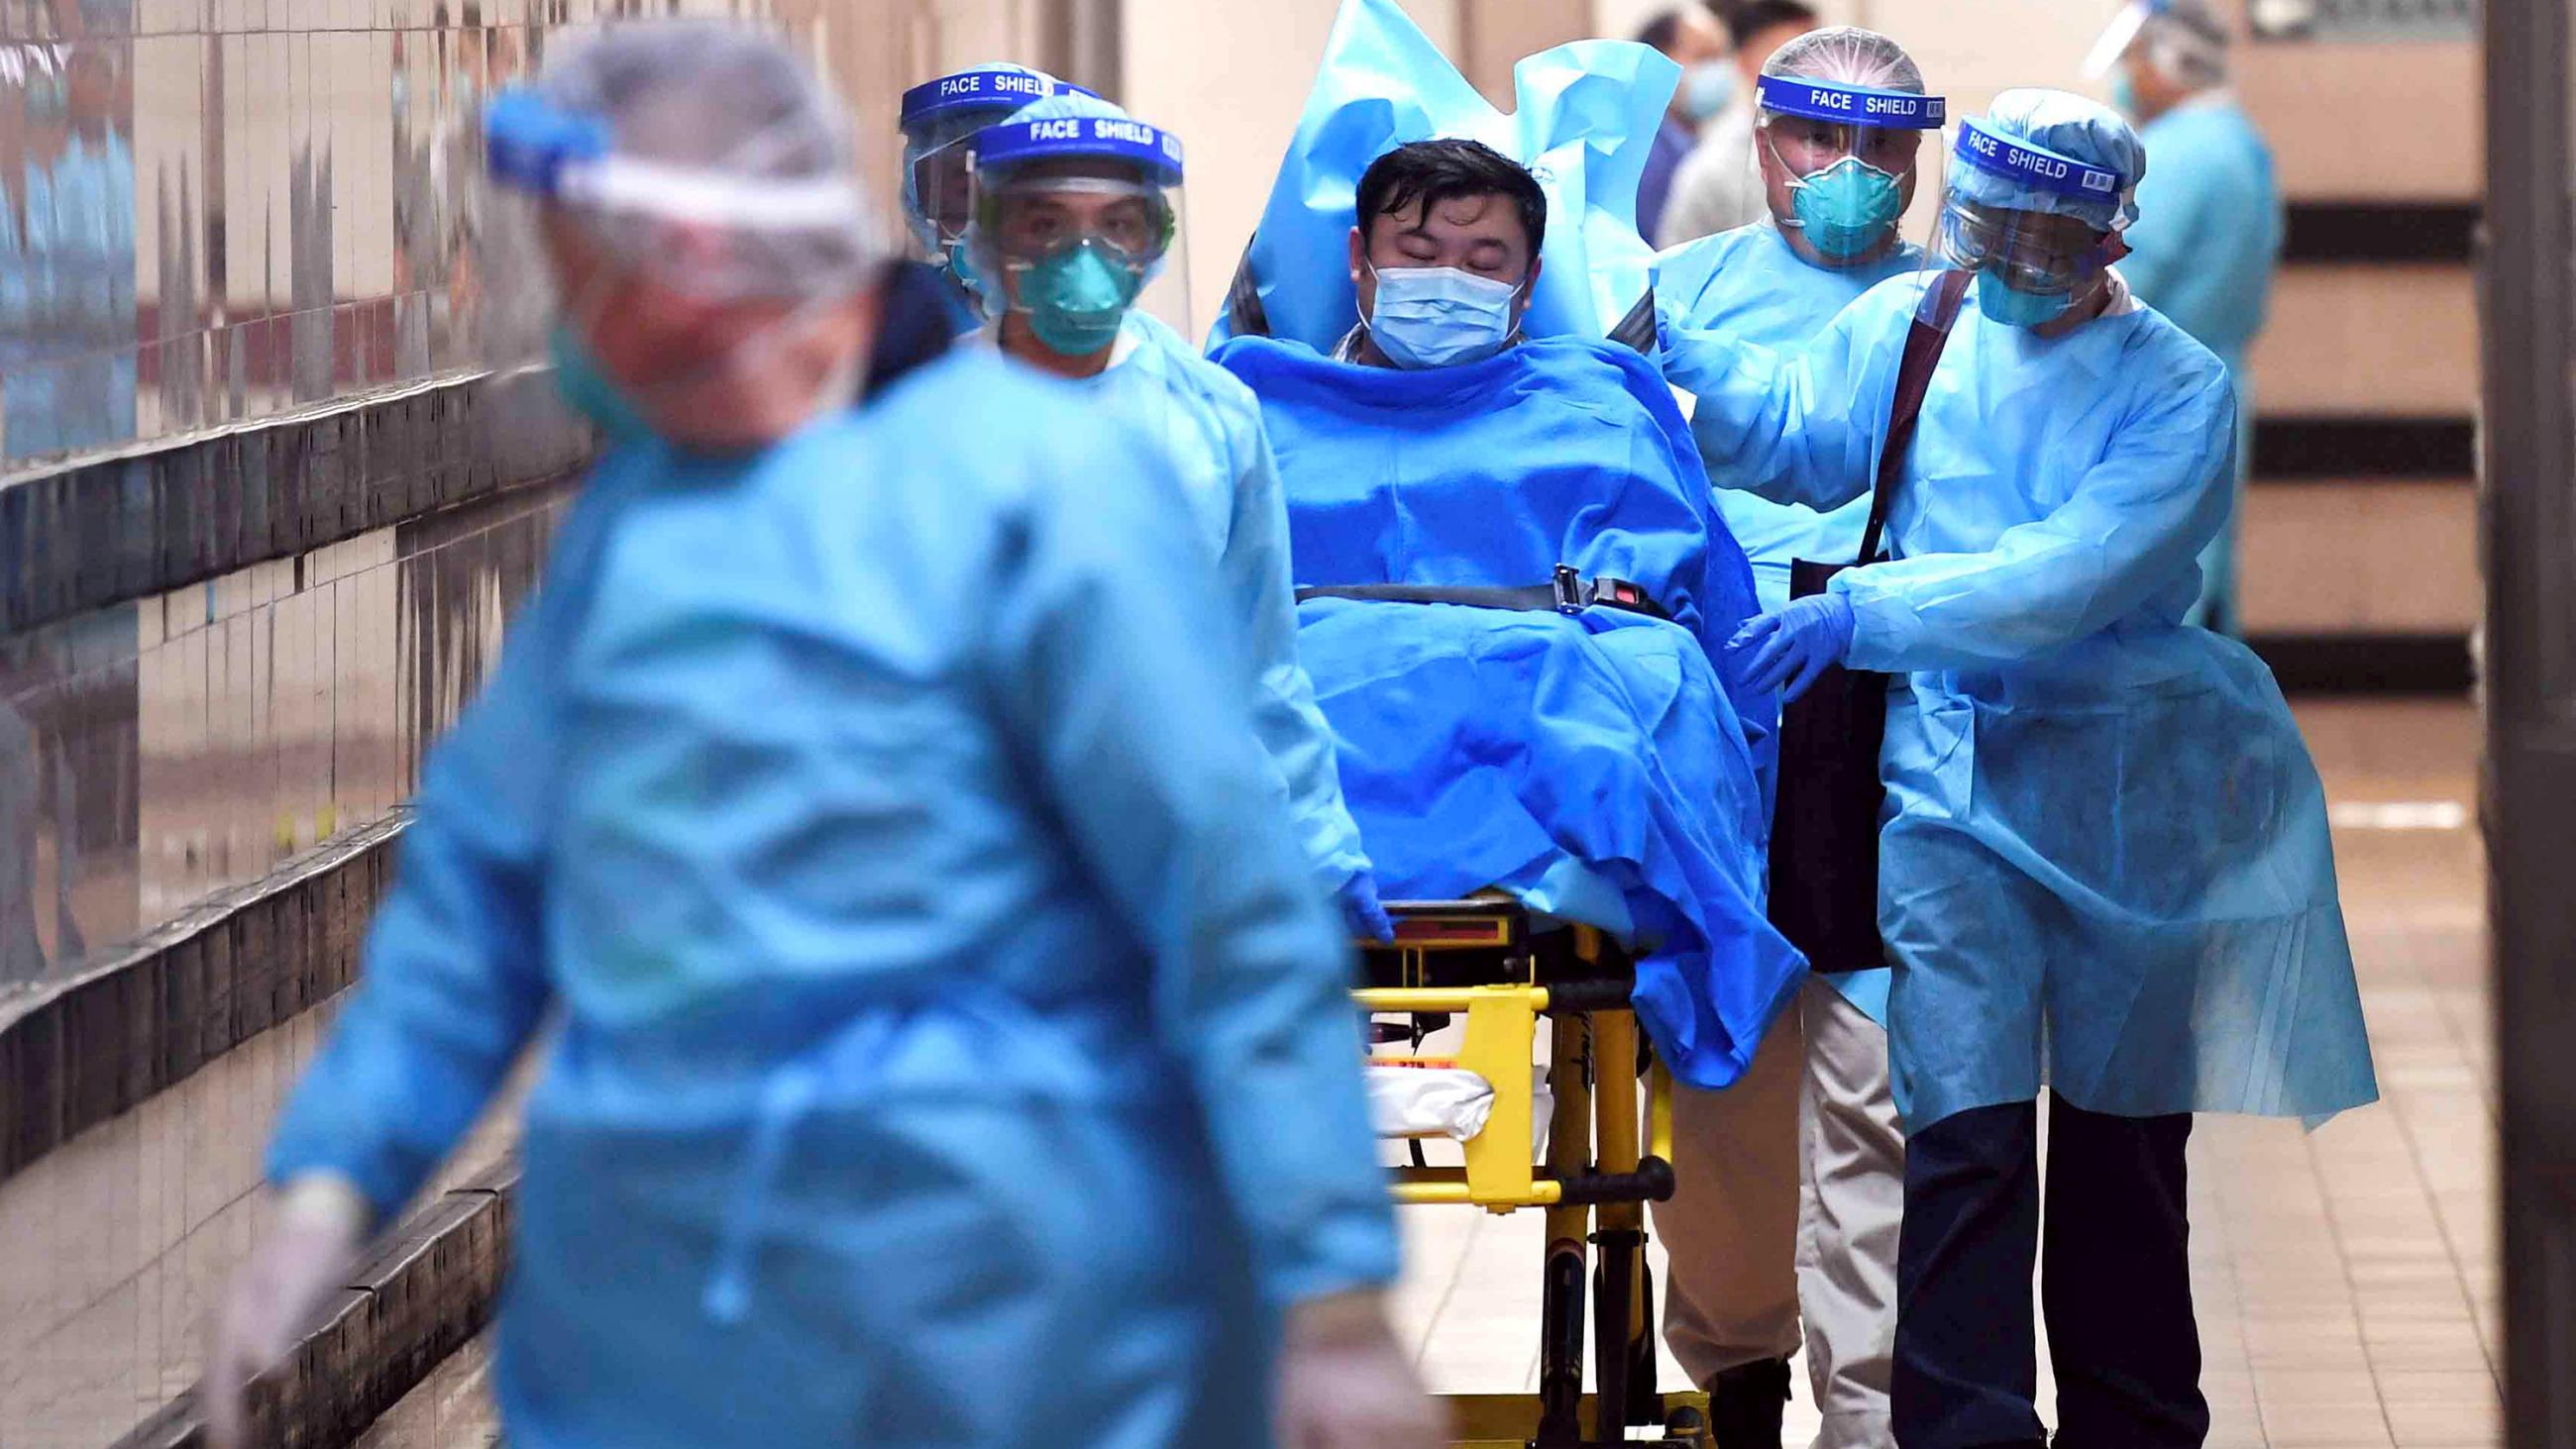 Picture shows a patient on a wheeled bed surrounded by four health care providers moving him with another caregiver walking in front. They all are covered head-to-toe in blue protective gear. 